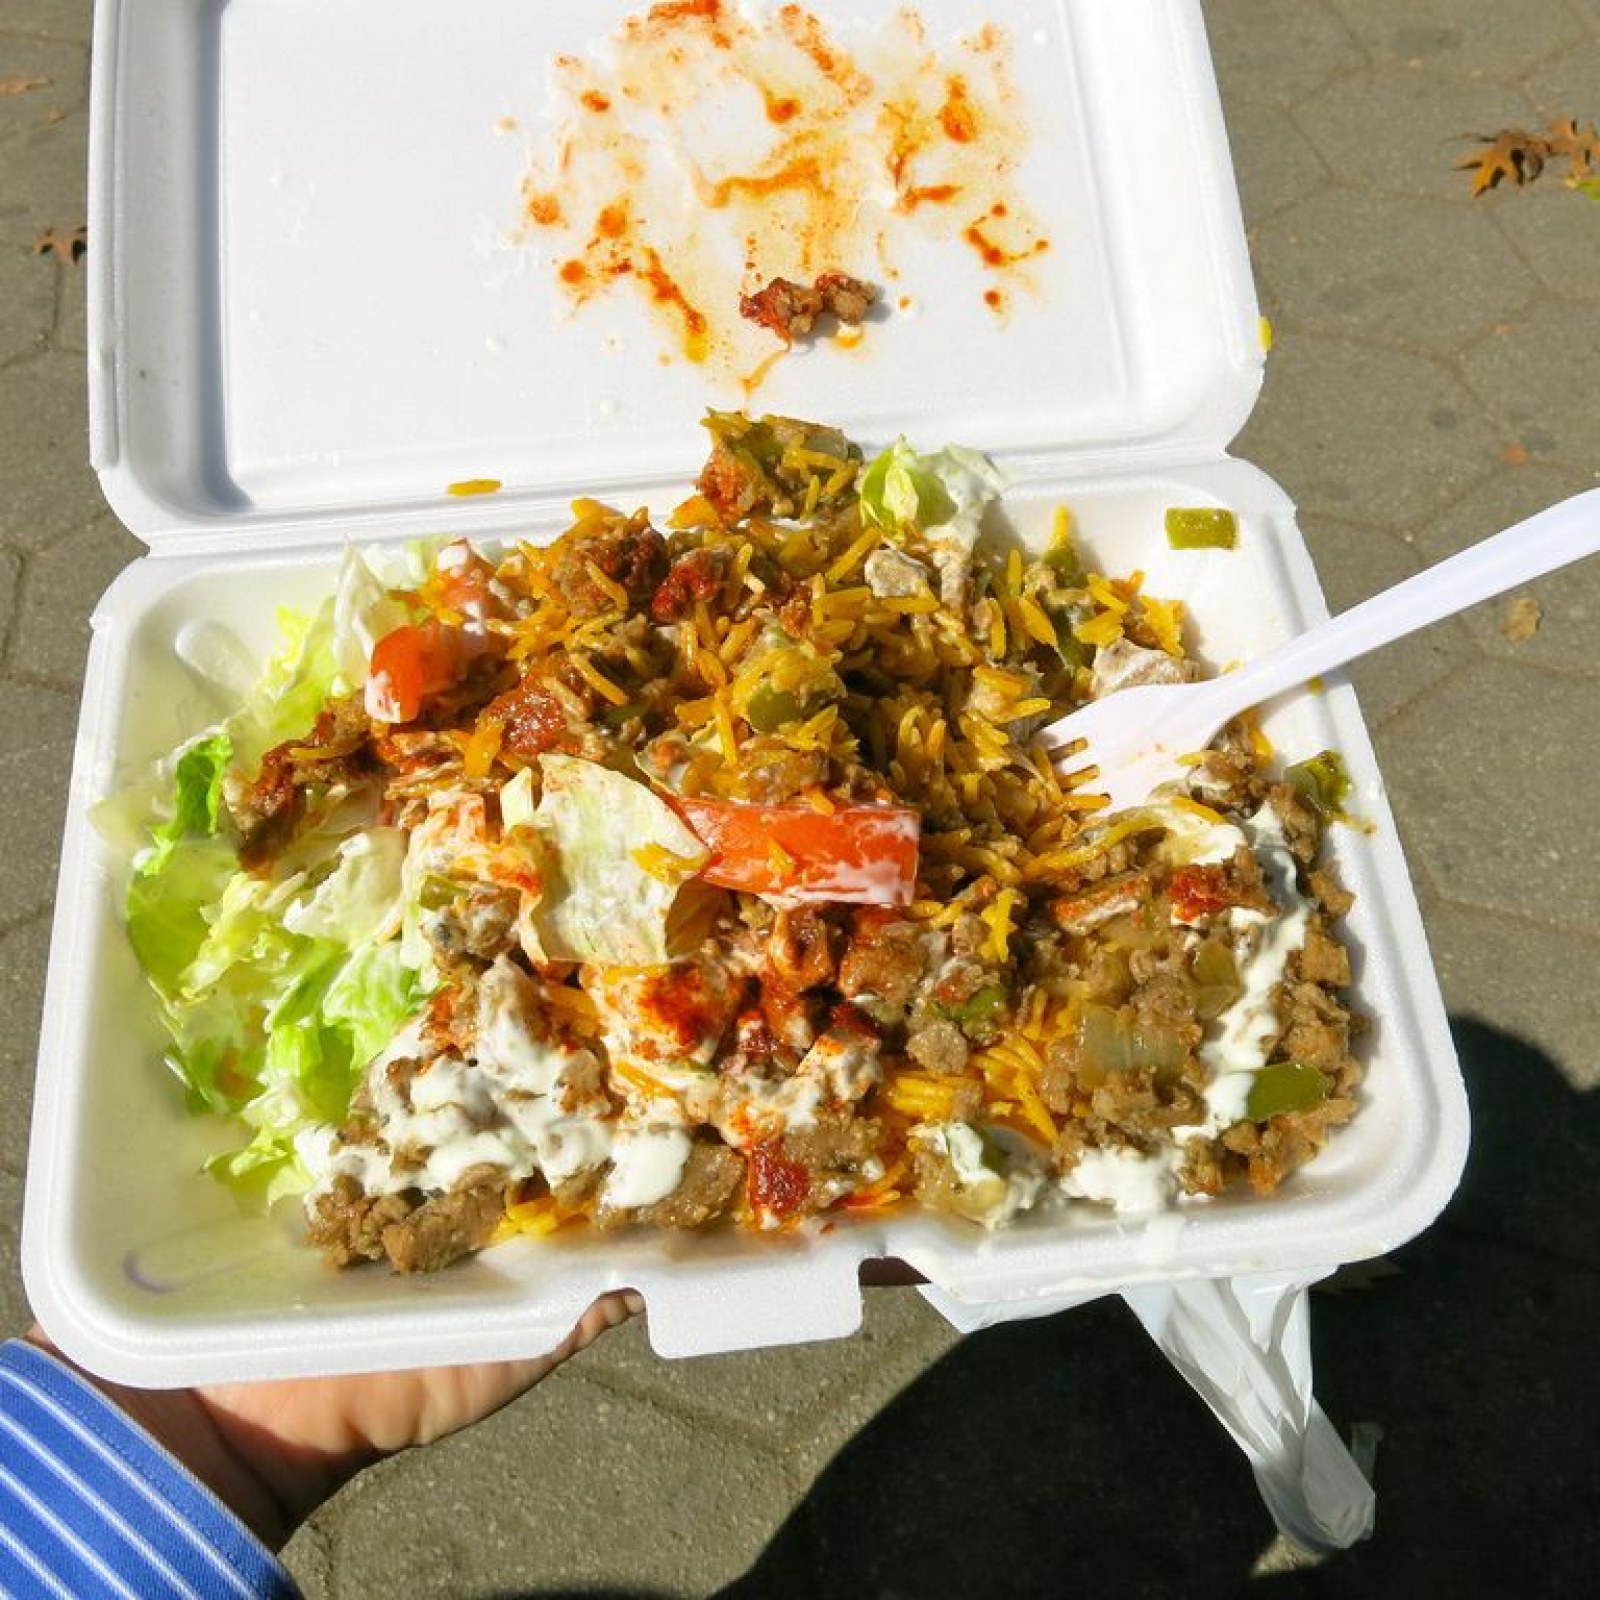 Styrofoam Food Containers to Be Banned in New York City